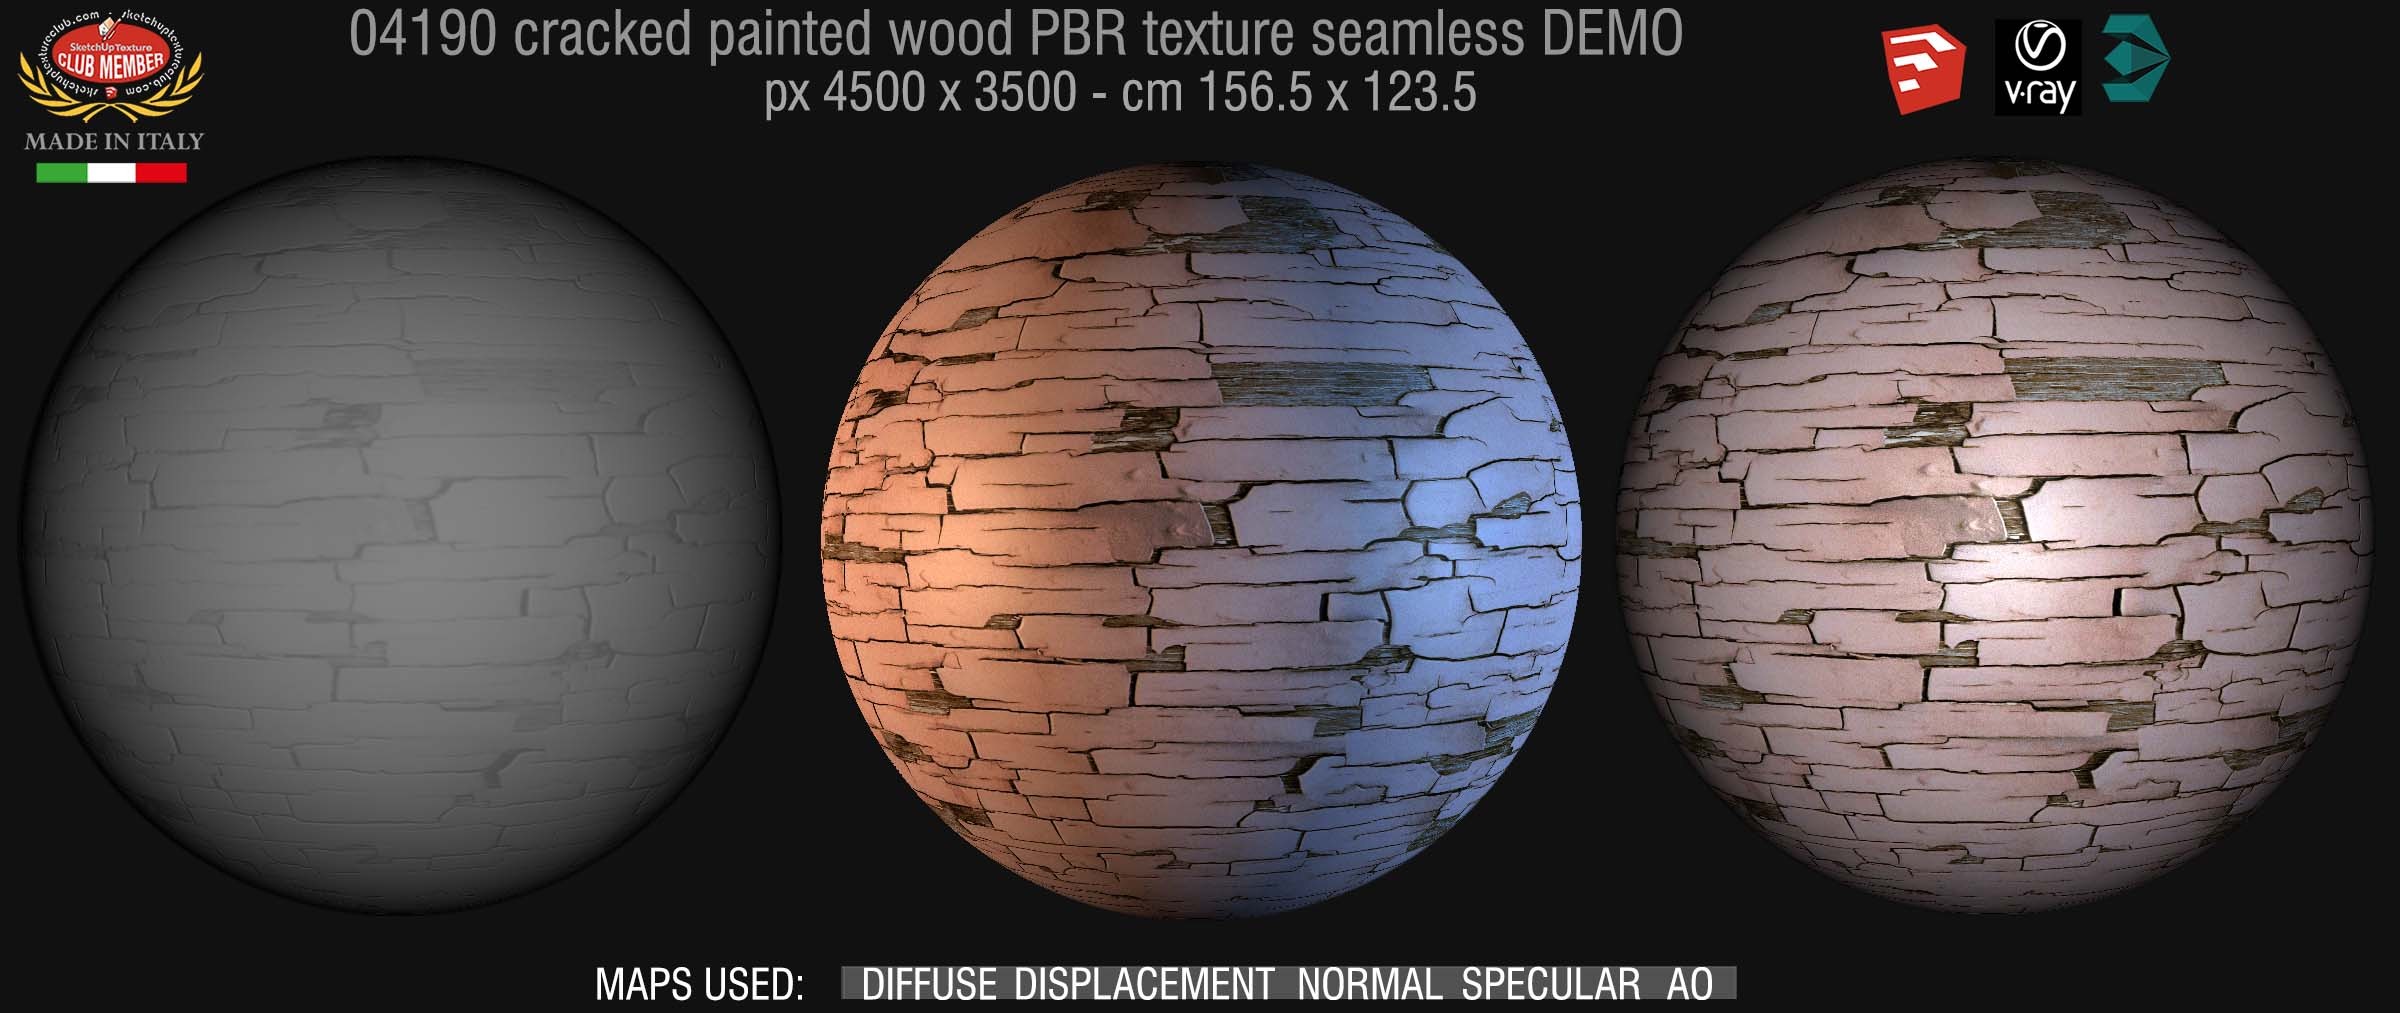 04190 cracked painted wood PBR texture seamless DEMO